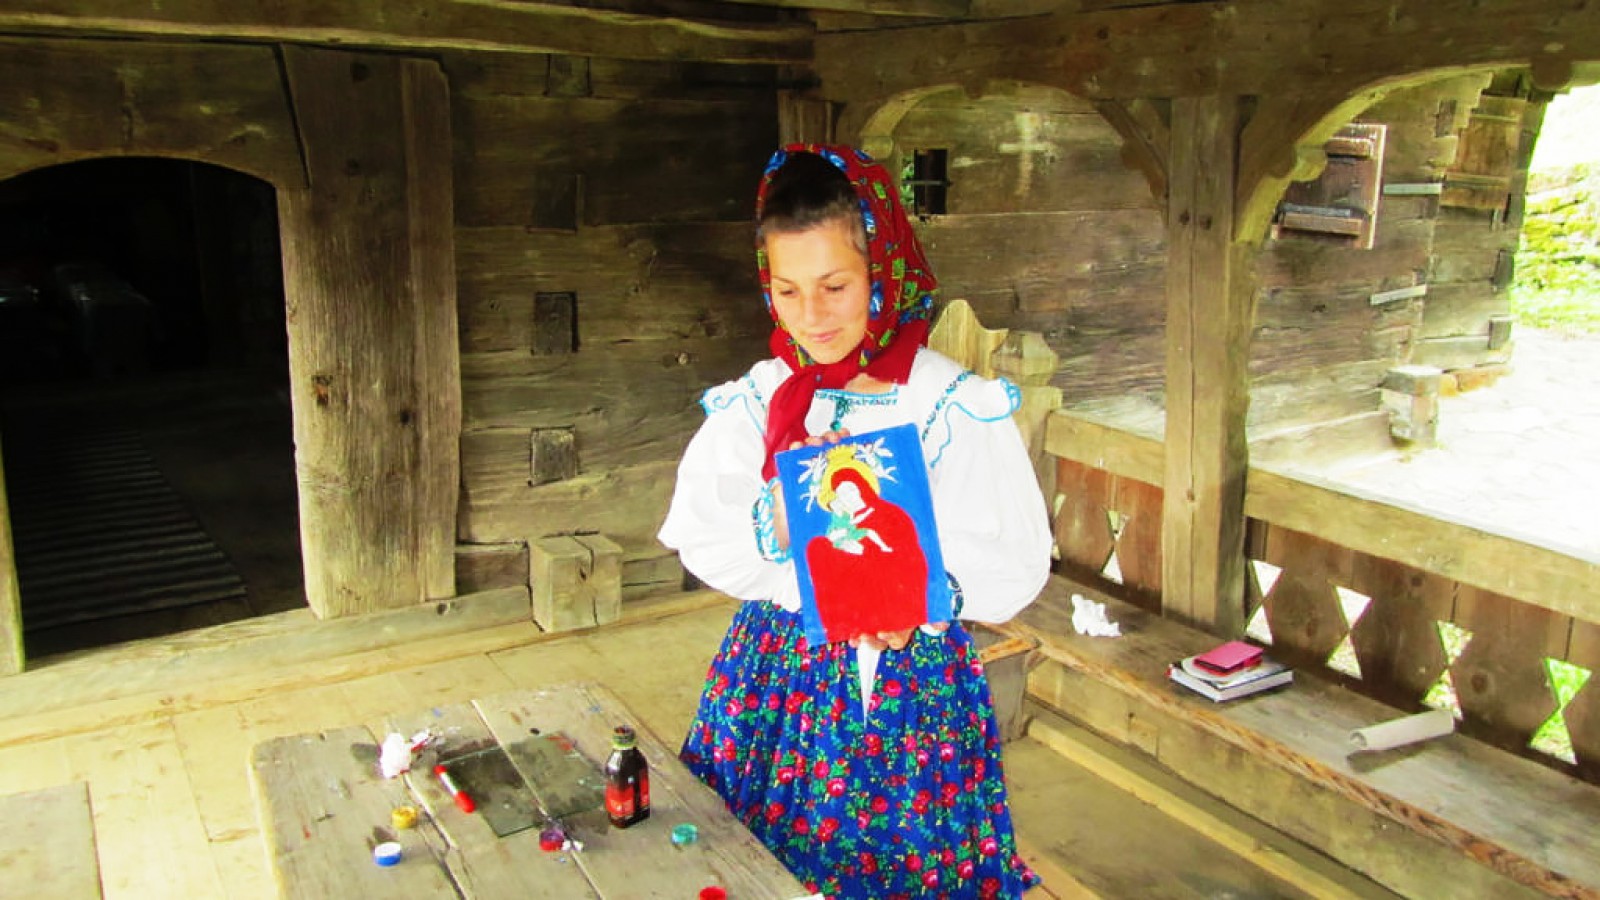 Maramures Wooden Churches Route